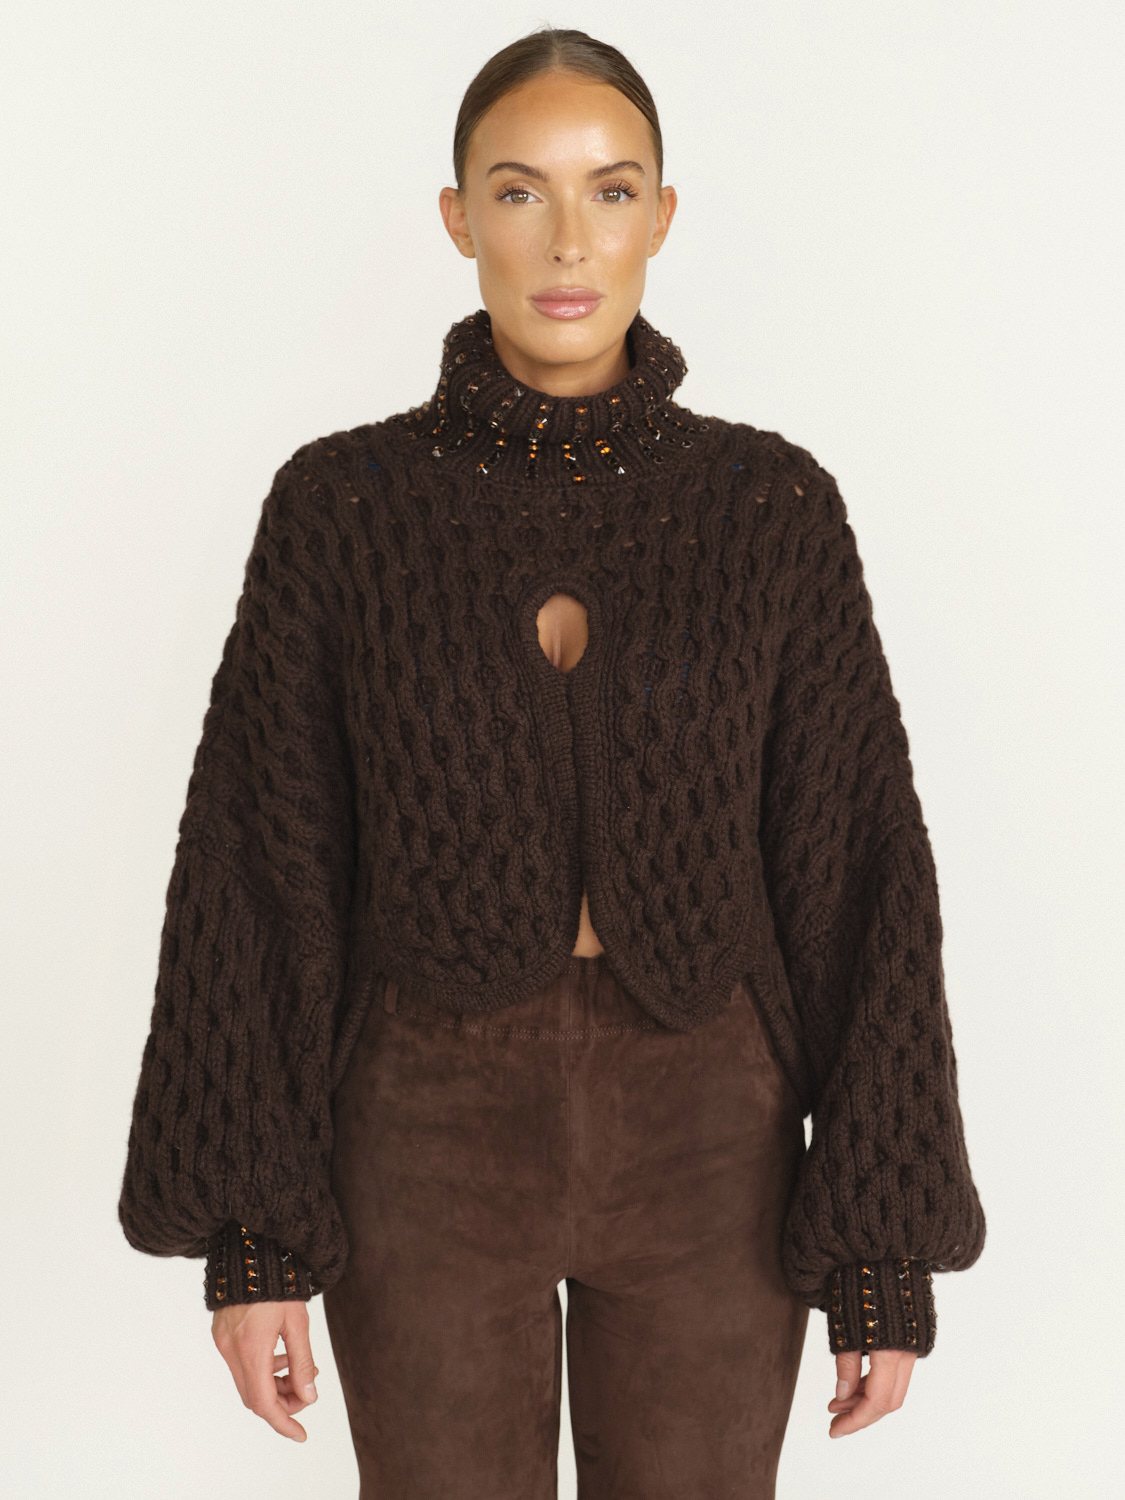 Letanne Oversized turtleneck sweater with crystals on collar brown One Size